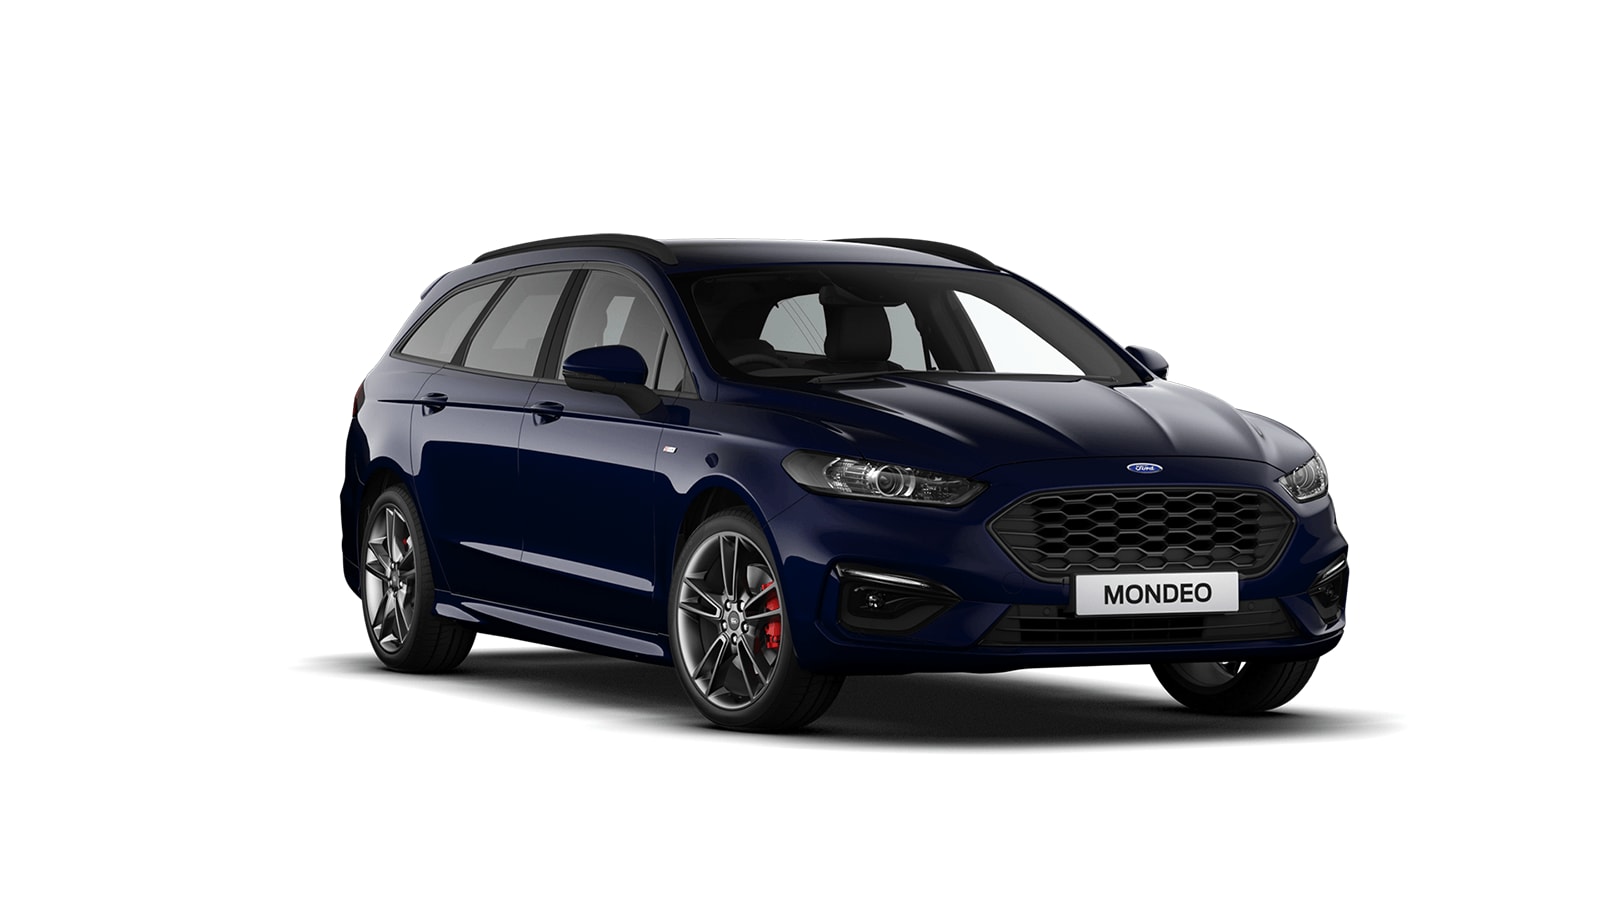 Ford Mondeo ST-Line Edition 2.0L TiVCT 187PS HEV at RGR Garages